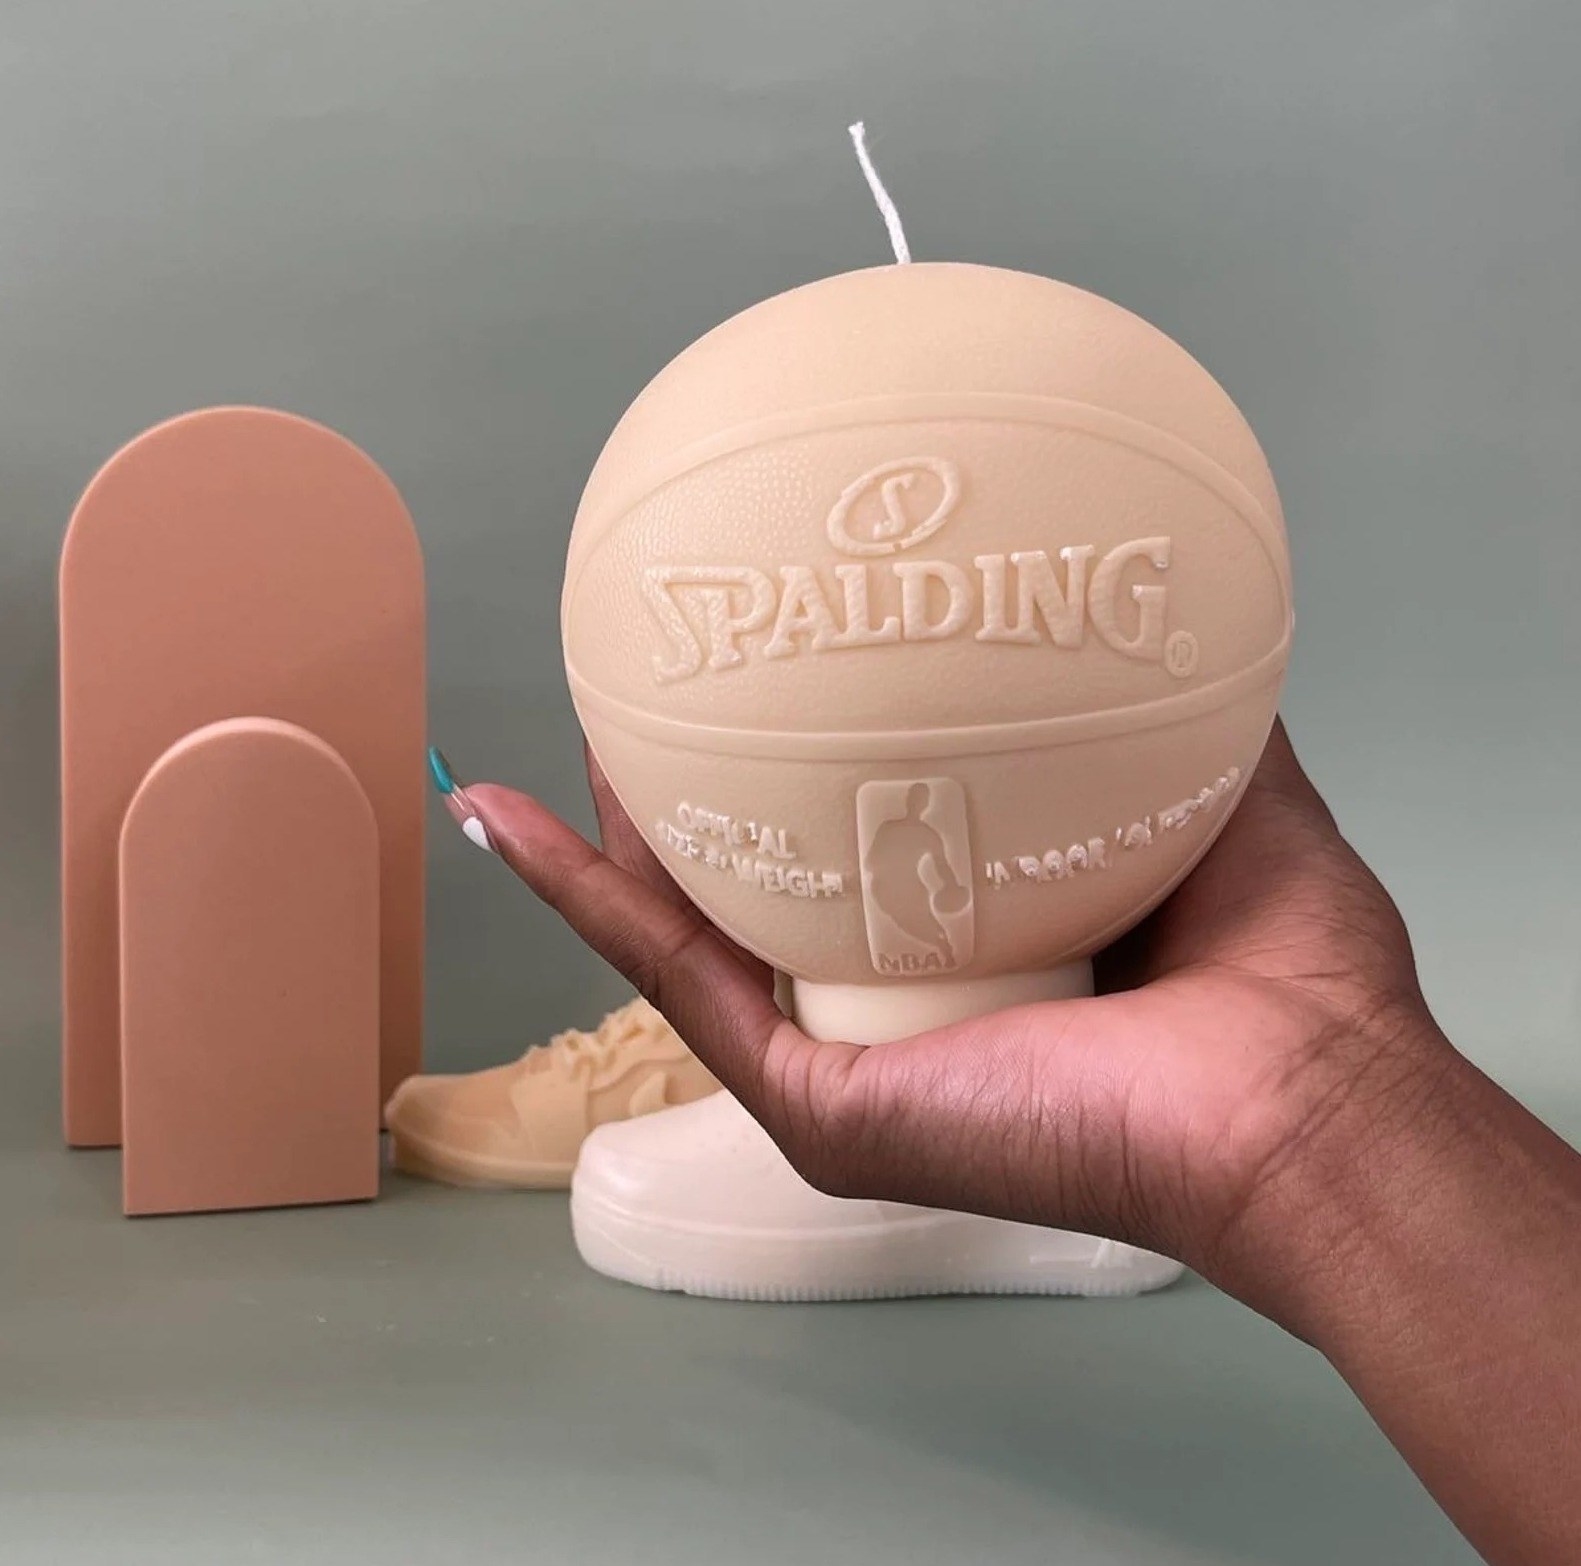 A hand holds a beige candle in the form of a small basketball